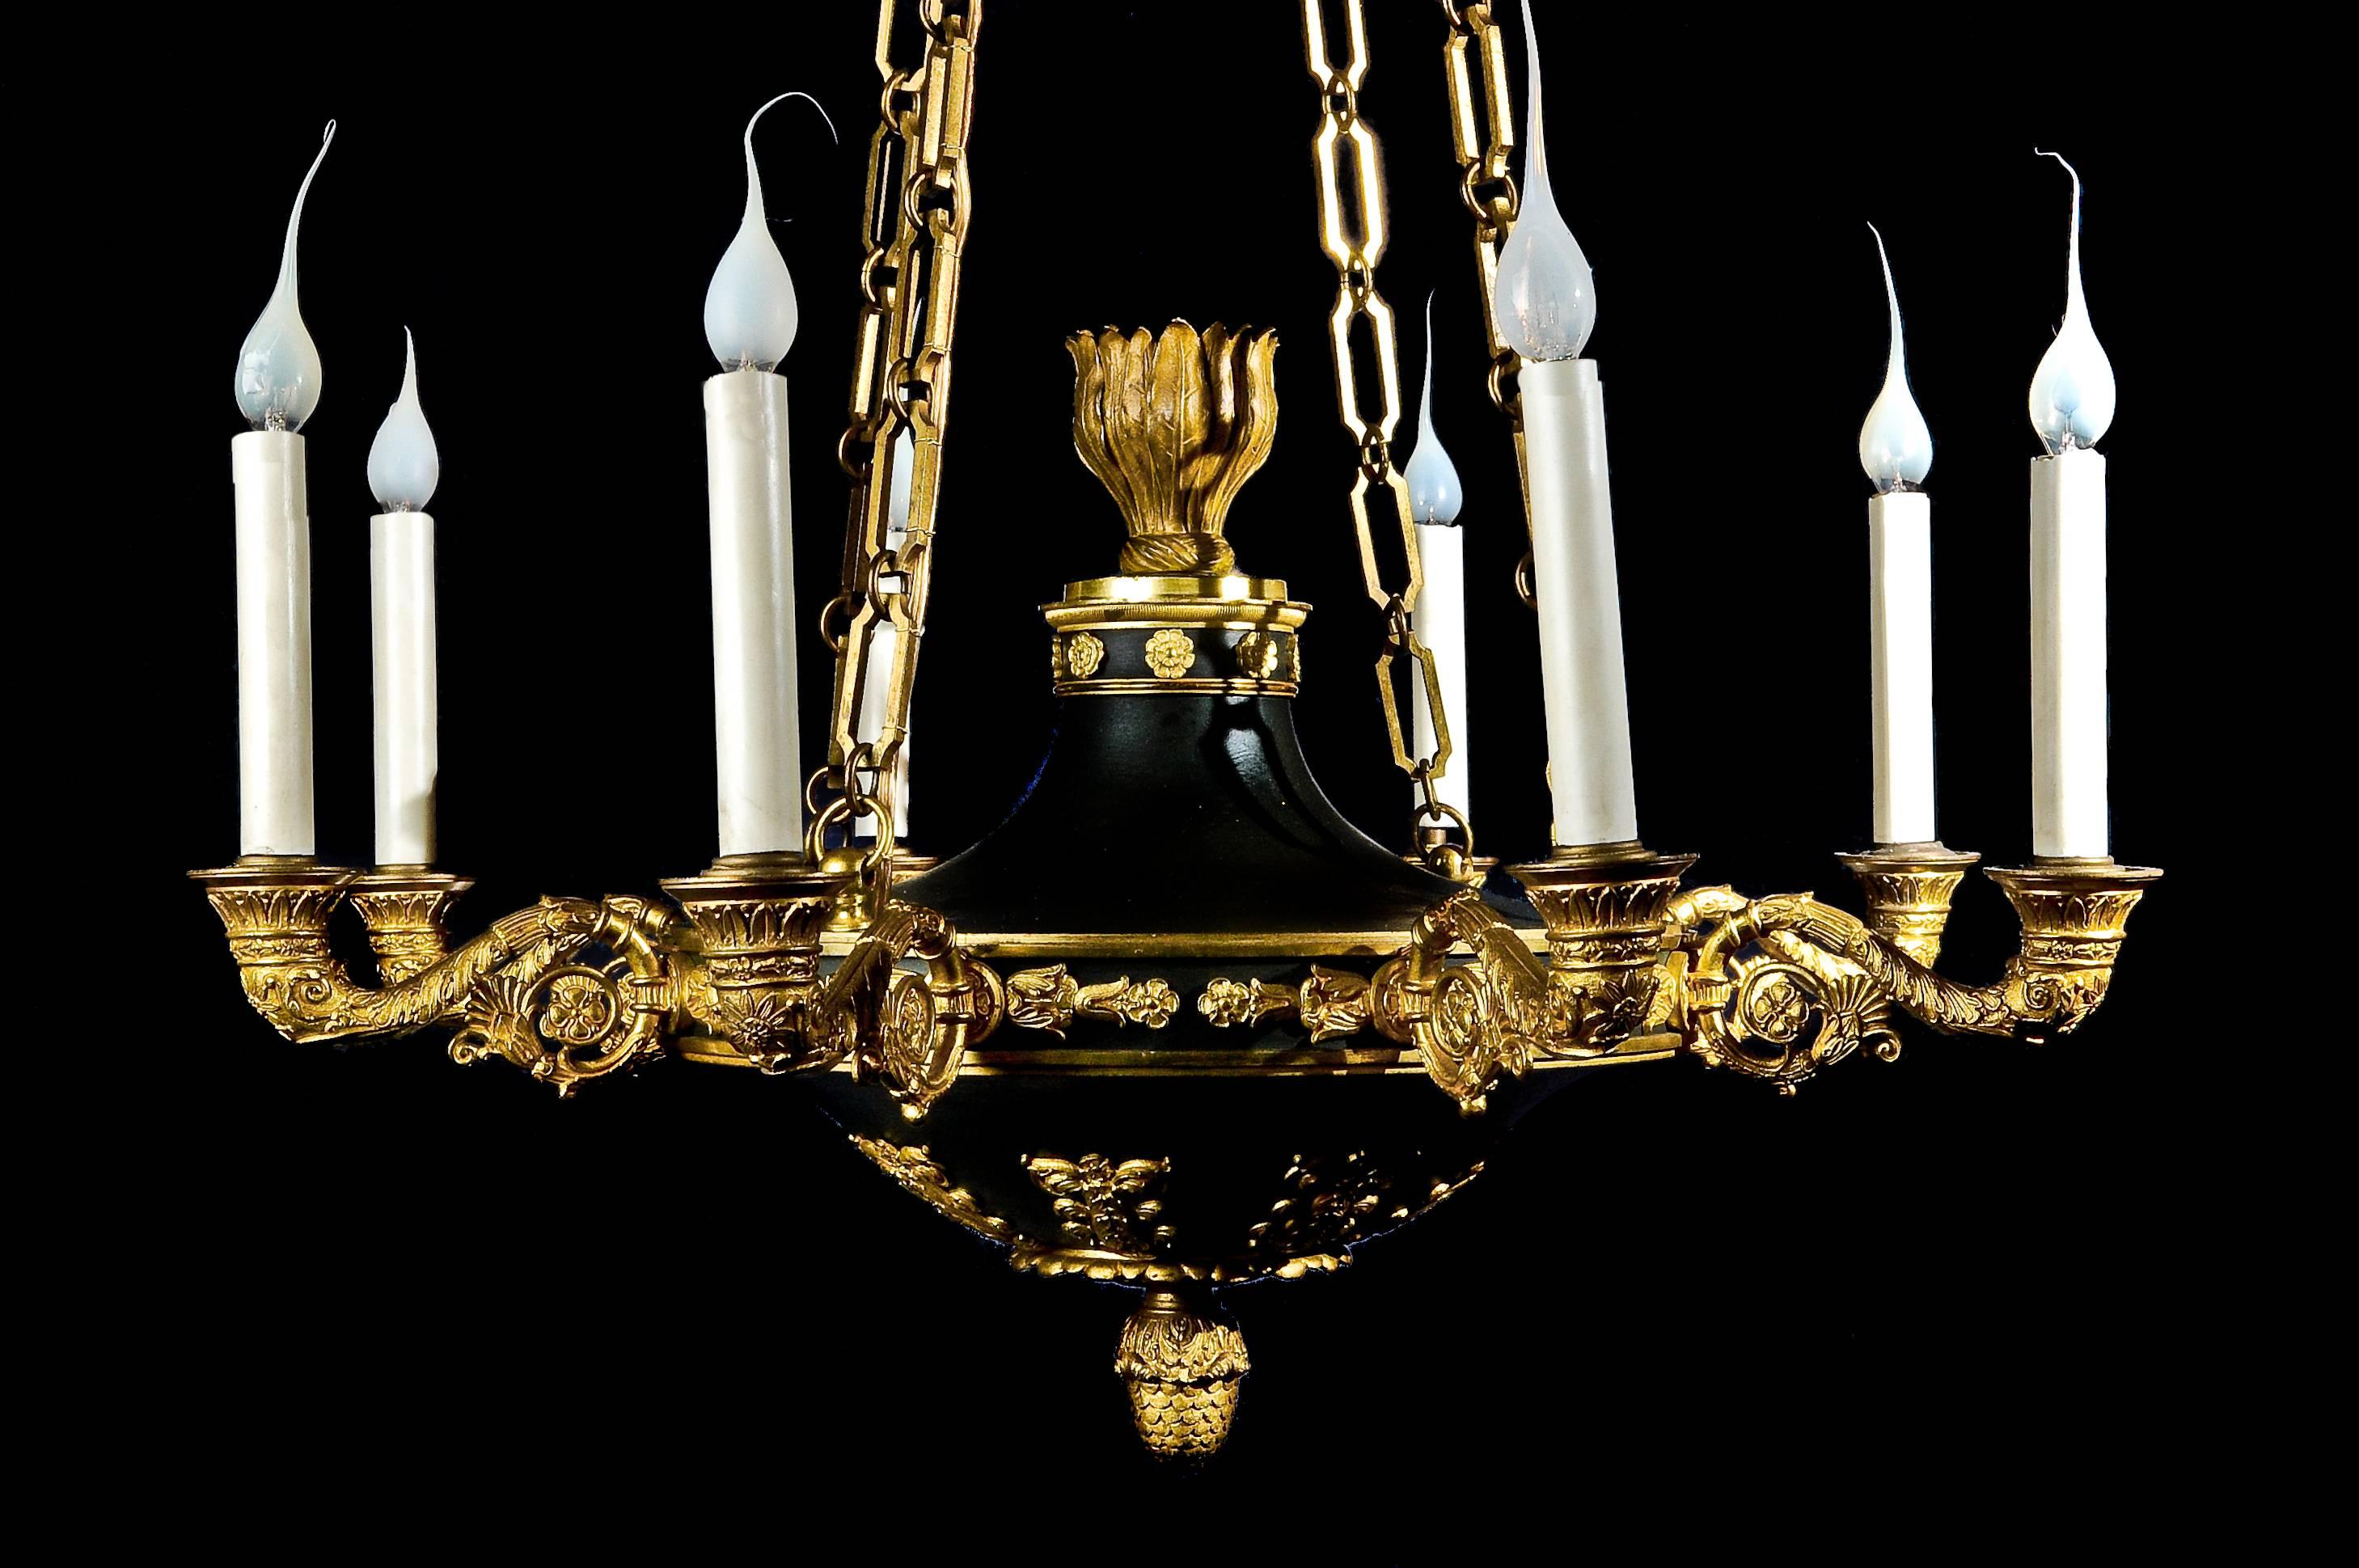 Fine Antique French Empire Neoclassical Gilt and Patina Bronze Chandelier In Good Condition For Sale In New York, NY